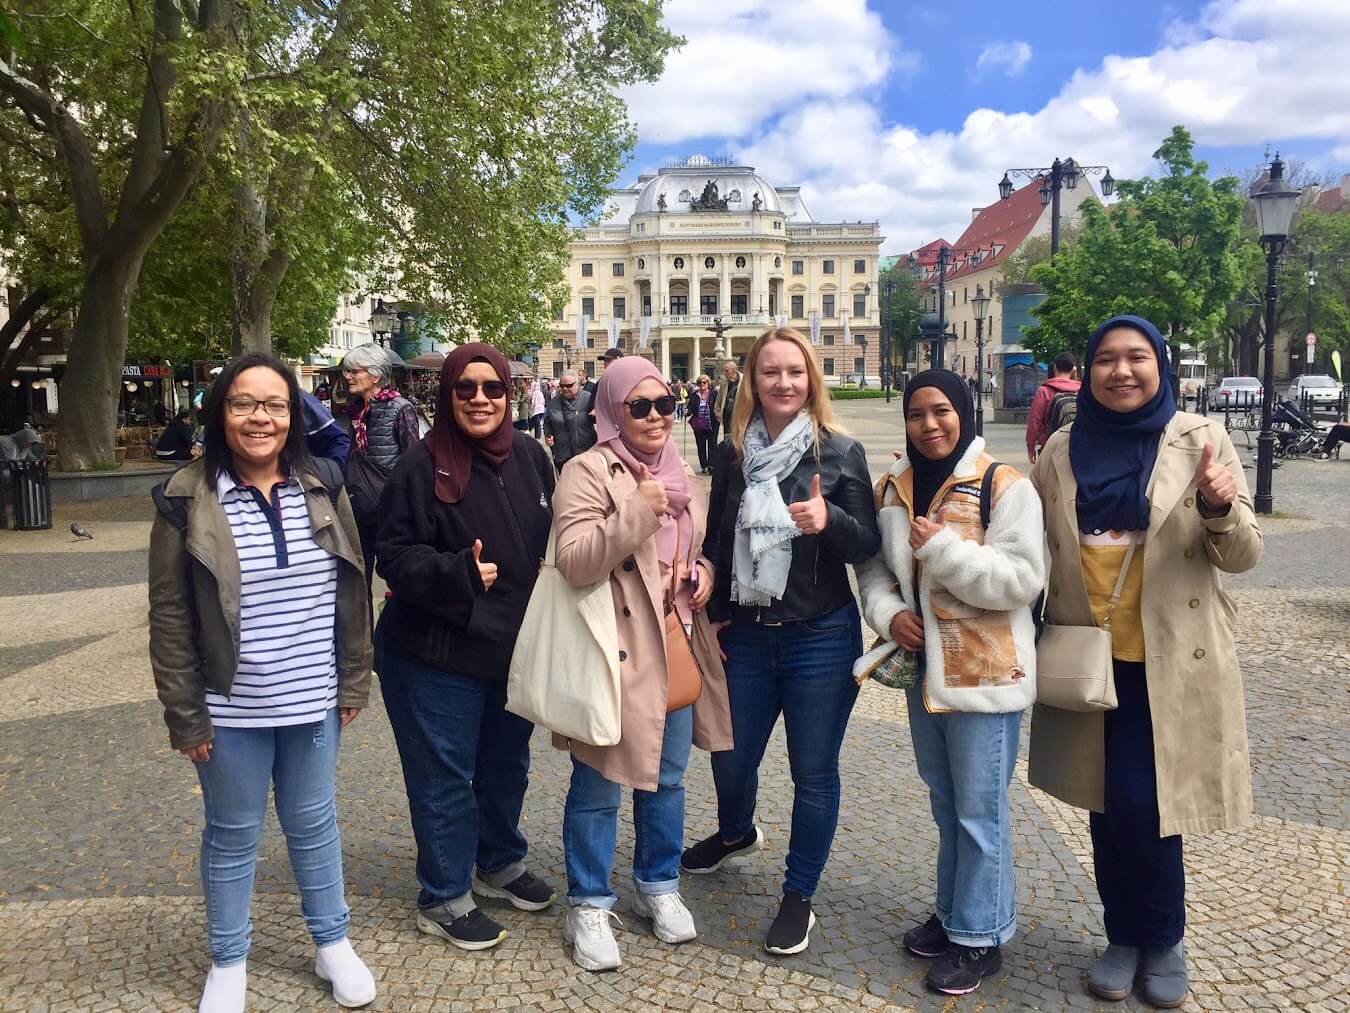 Bratislava city tours, happy clients during day trip from Vienna